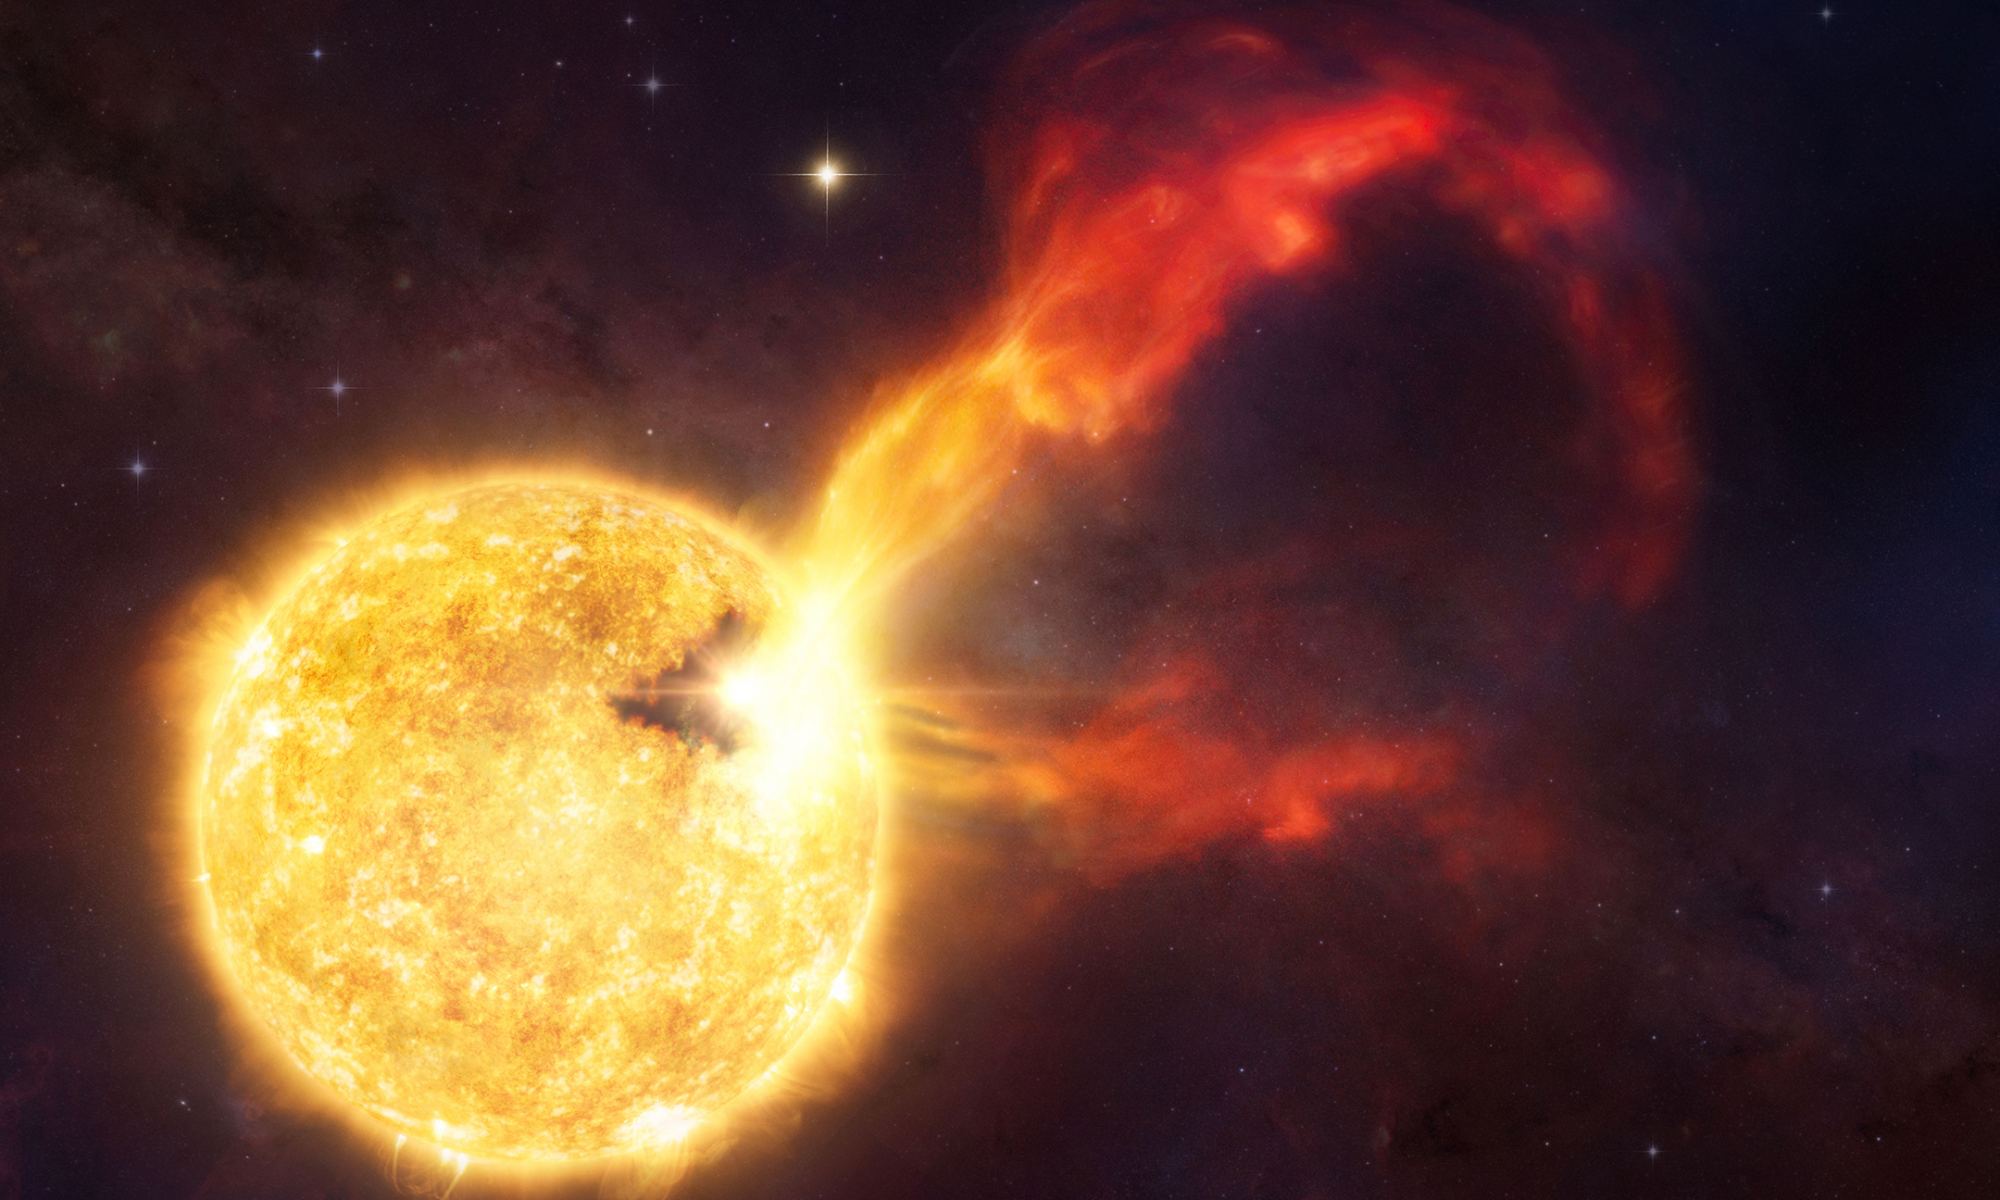 Artist's concept of the flare that burst out from the young nearby star HD 283572. The flare was detected by the Submillimeter Array on Mauna Kea, in Hawai'i. Credit: CfA/Melissa Weiss.